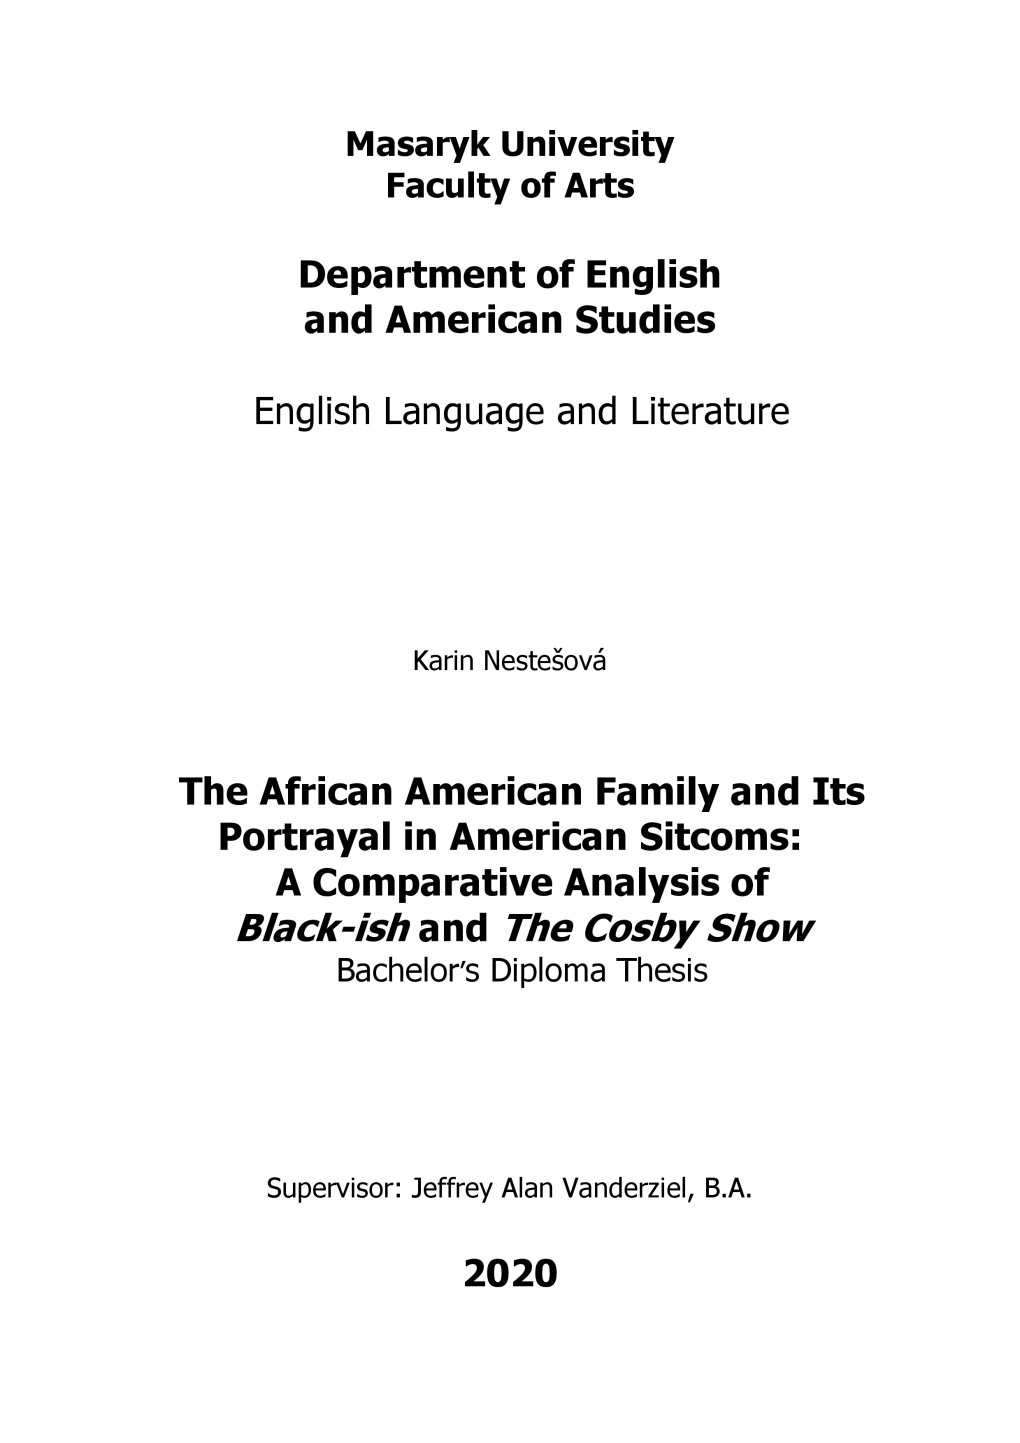 Department of English and American Studies English Language and Literature the African American Family and Its Portrayal in Amer